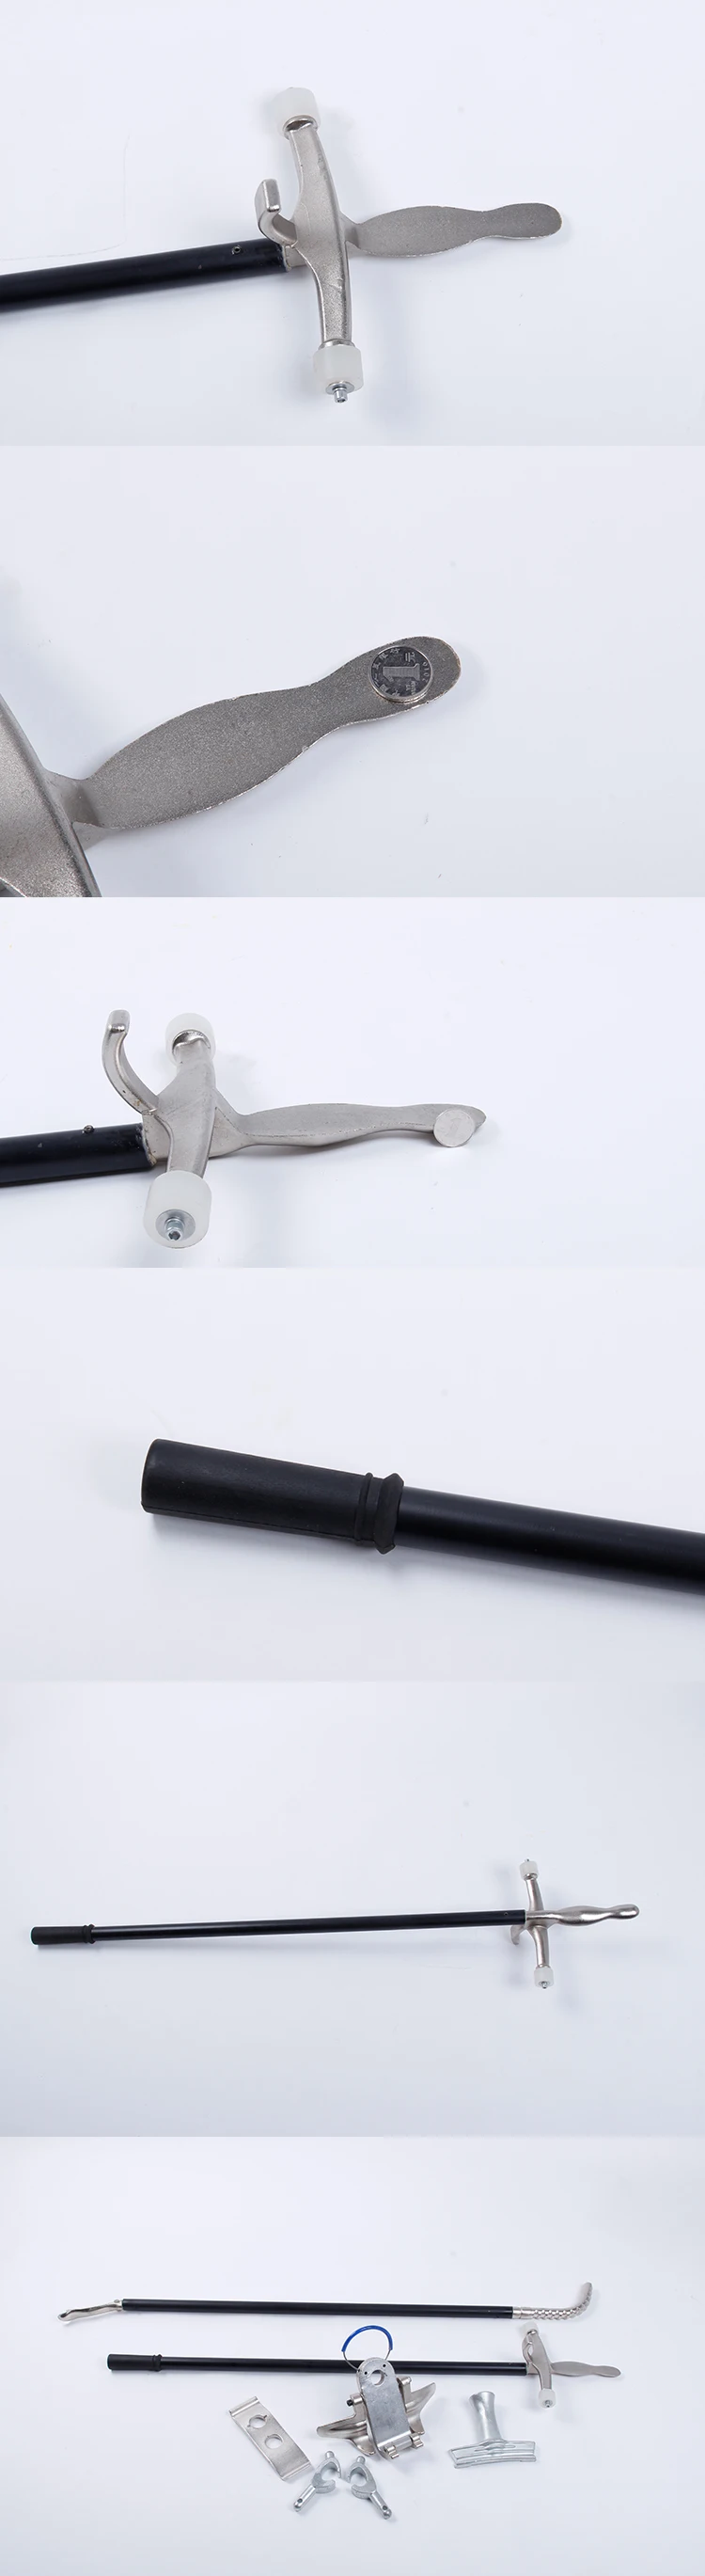 Tire Changing Tool/Tire Removal Tool/Demount Tire Tool